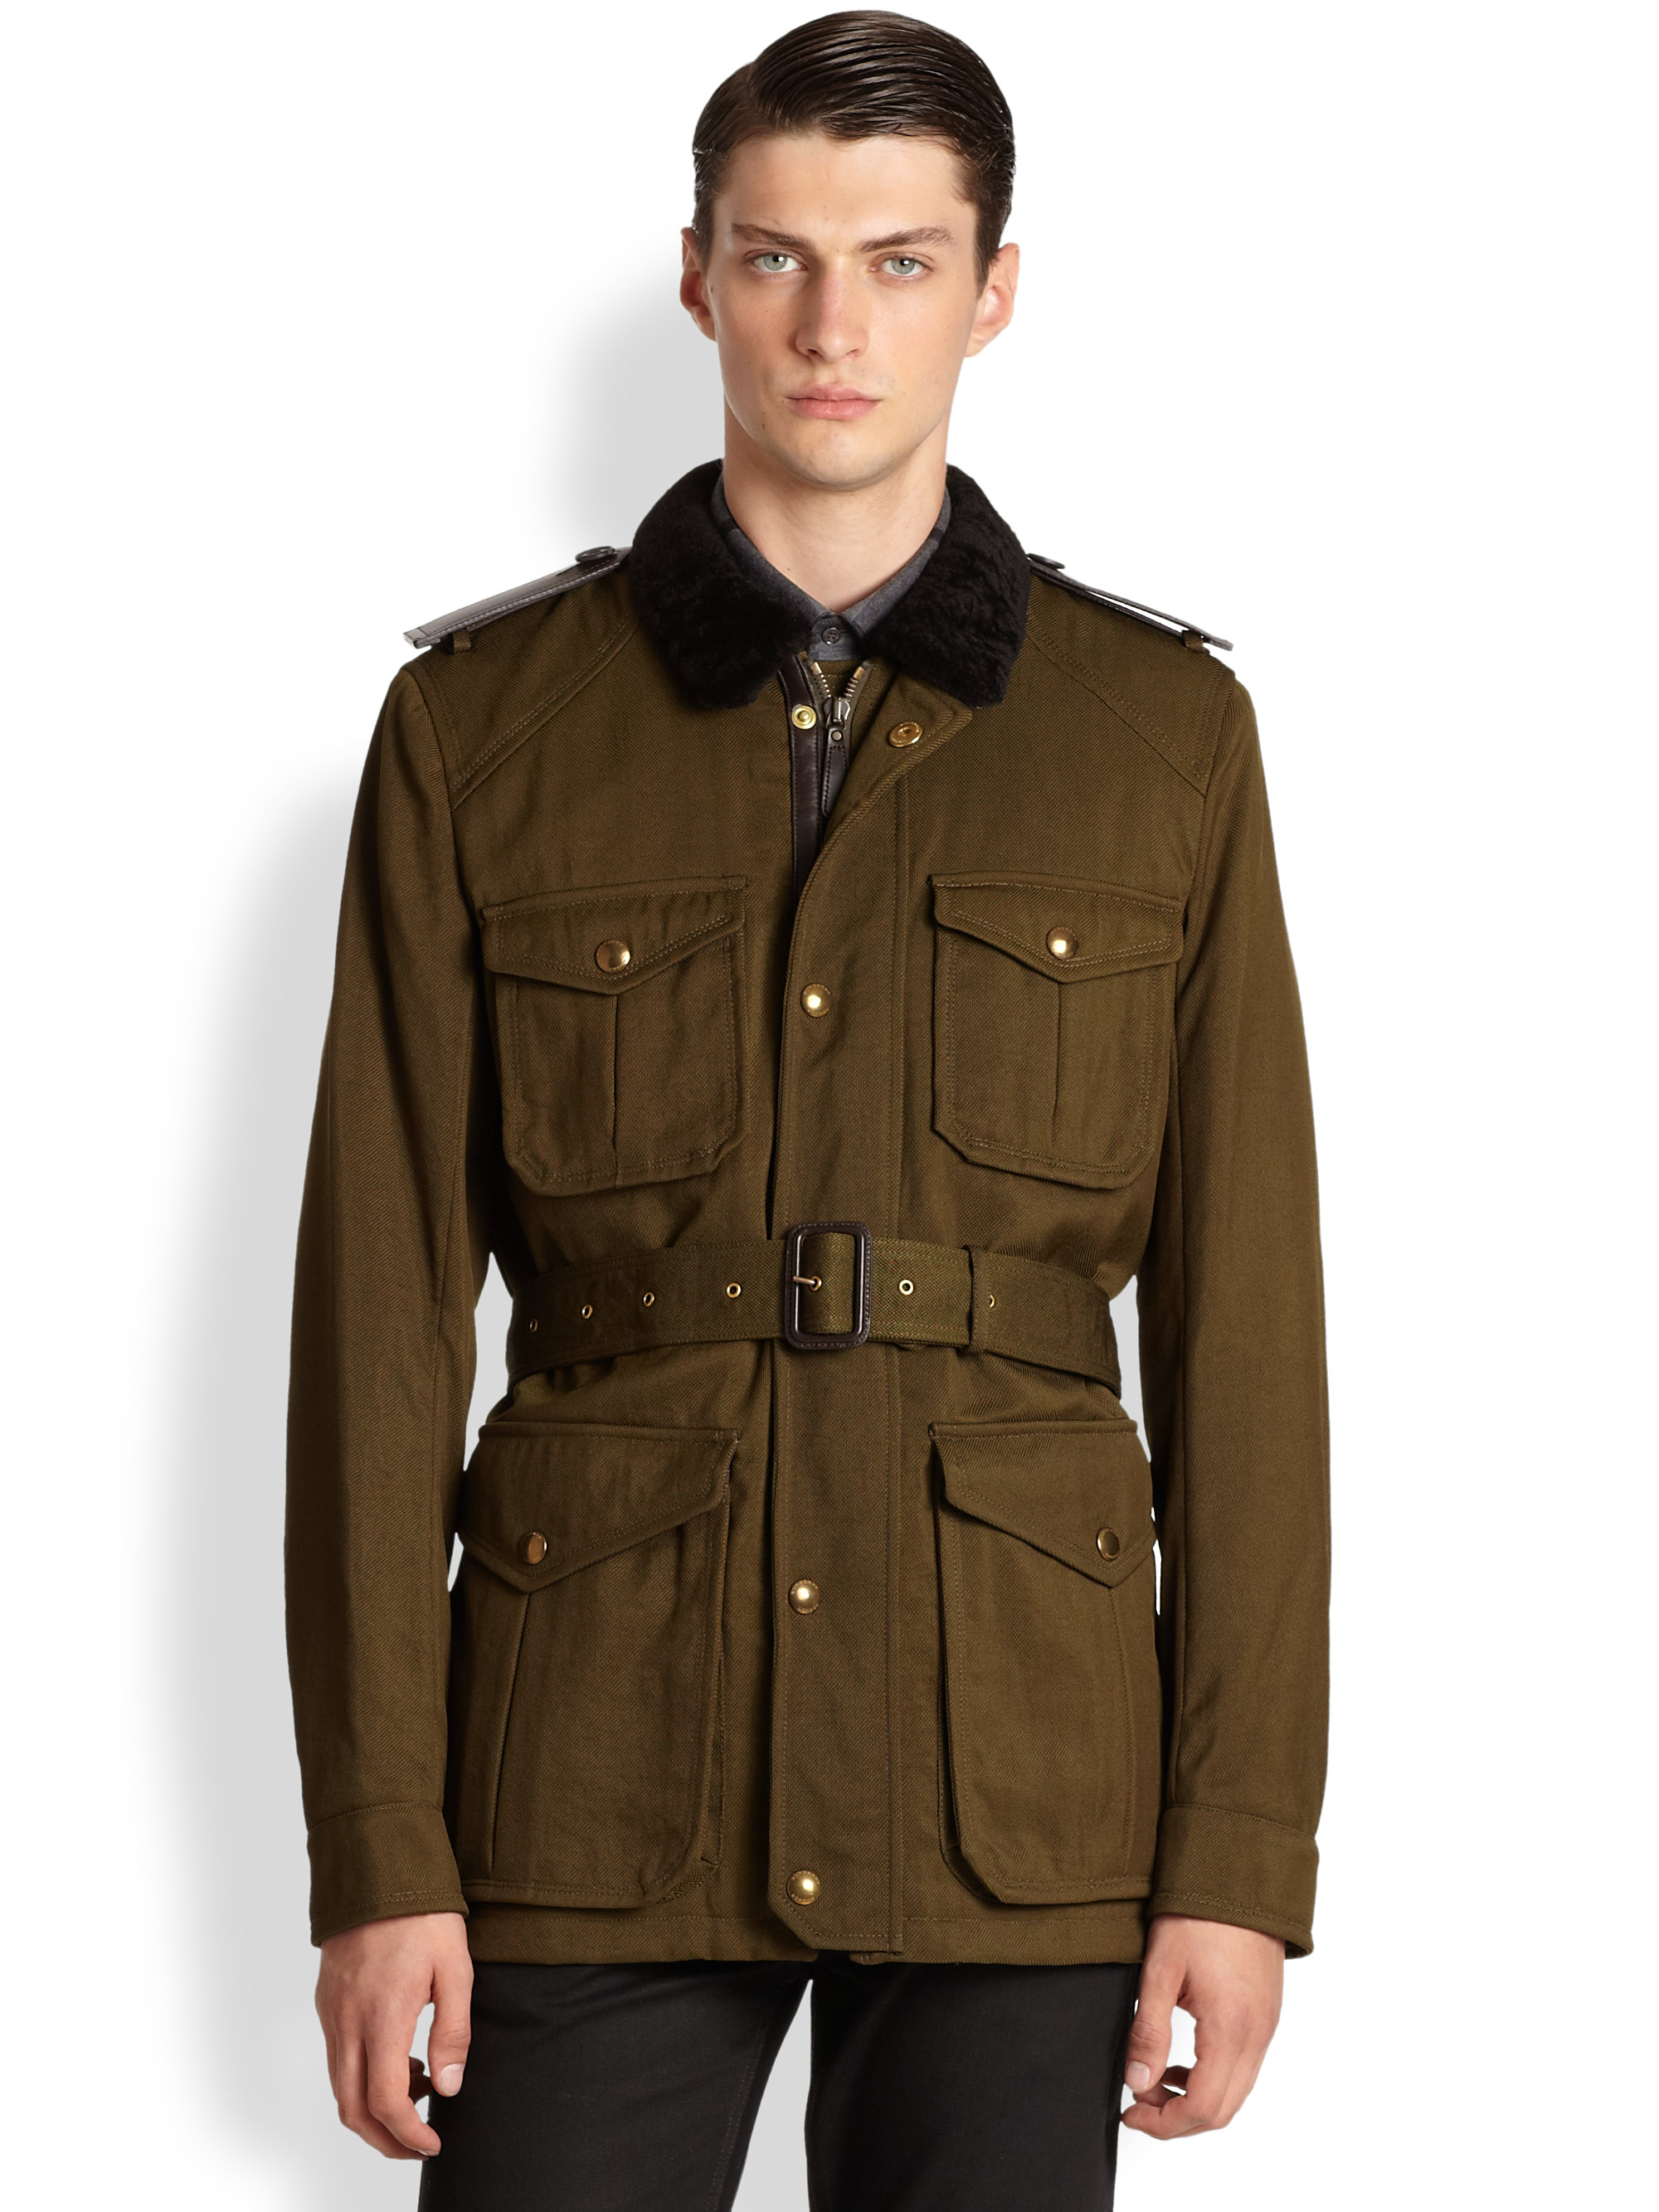 Lyst - Burberry Harlem Field Jacket in Brown for Men